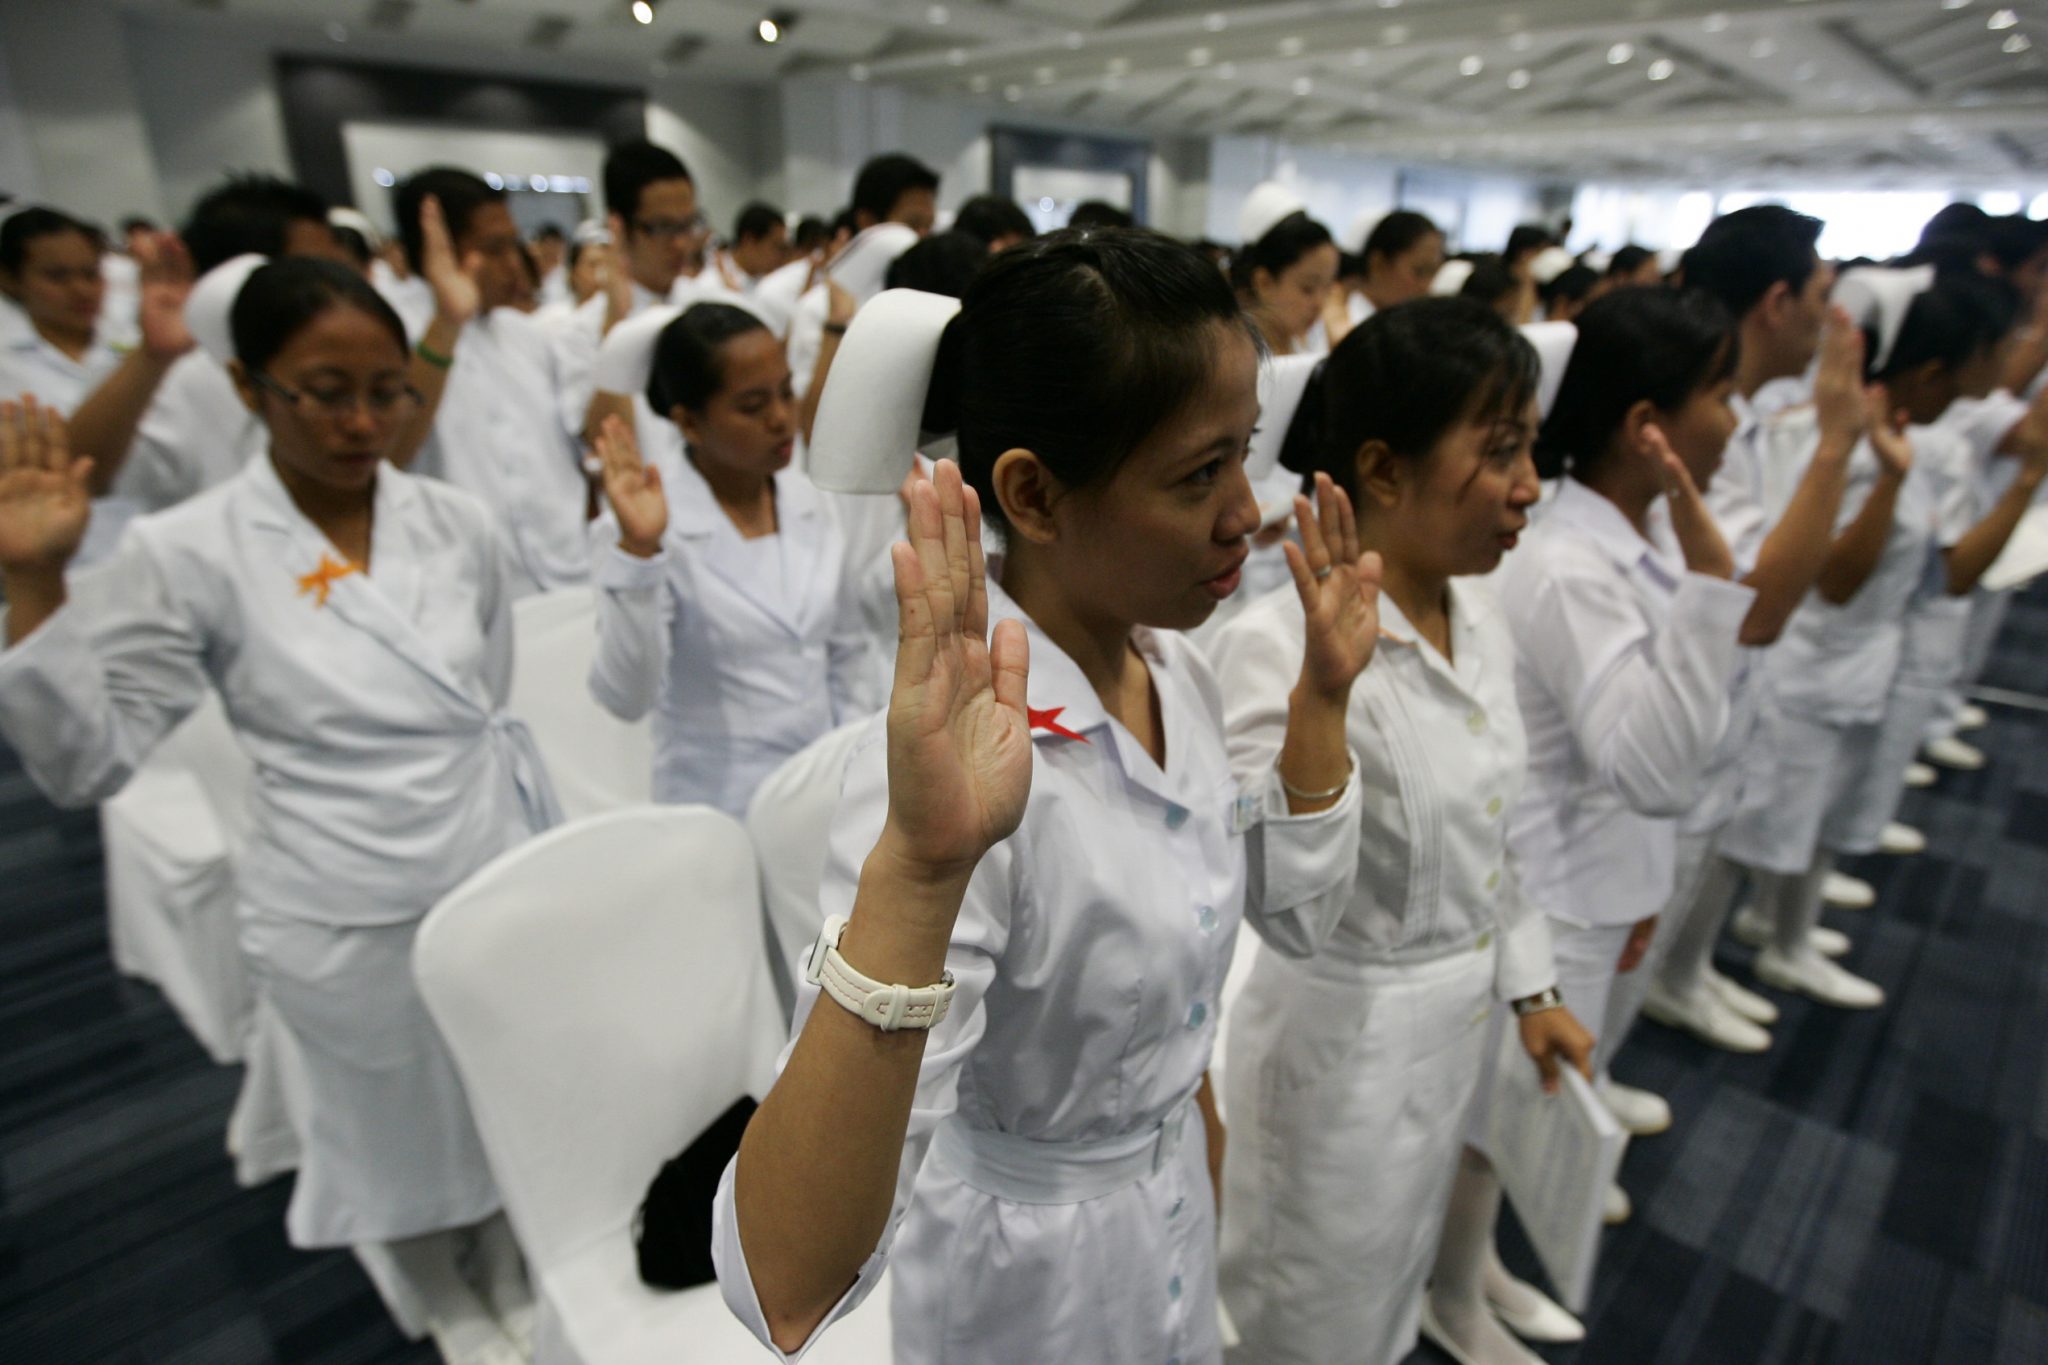 Philippines Aims To Deploy More Nurses Healthcare Staff Overseas